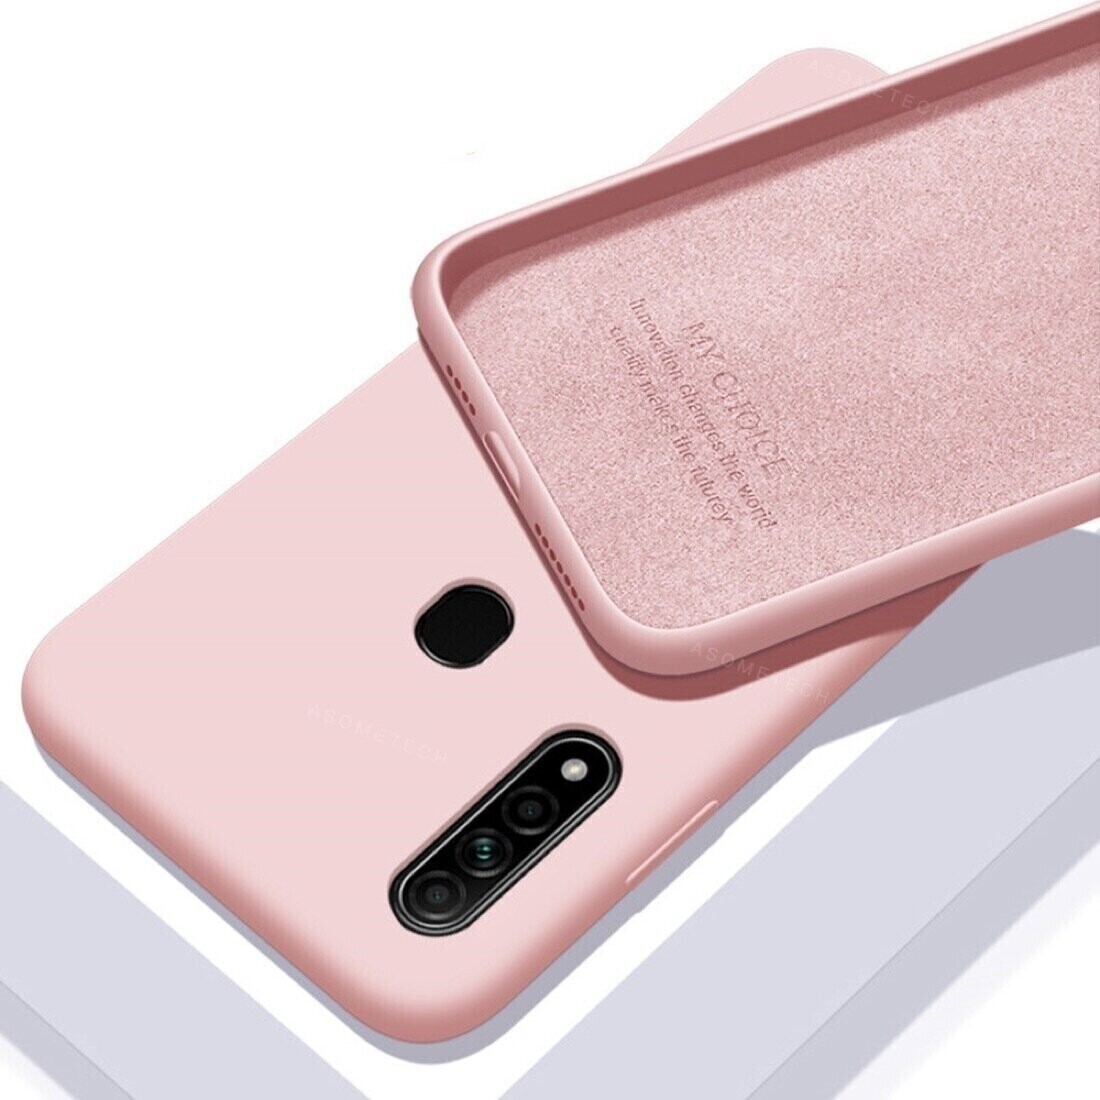 Komass Oppo A31 Liquid Silicone Back Cover, Pink